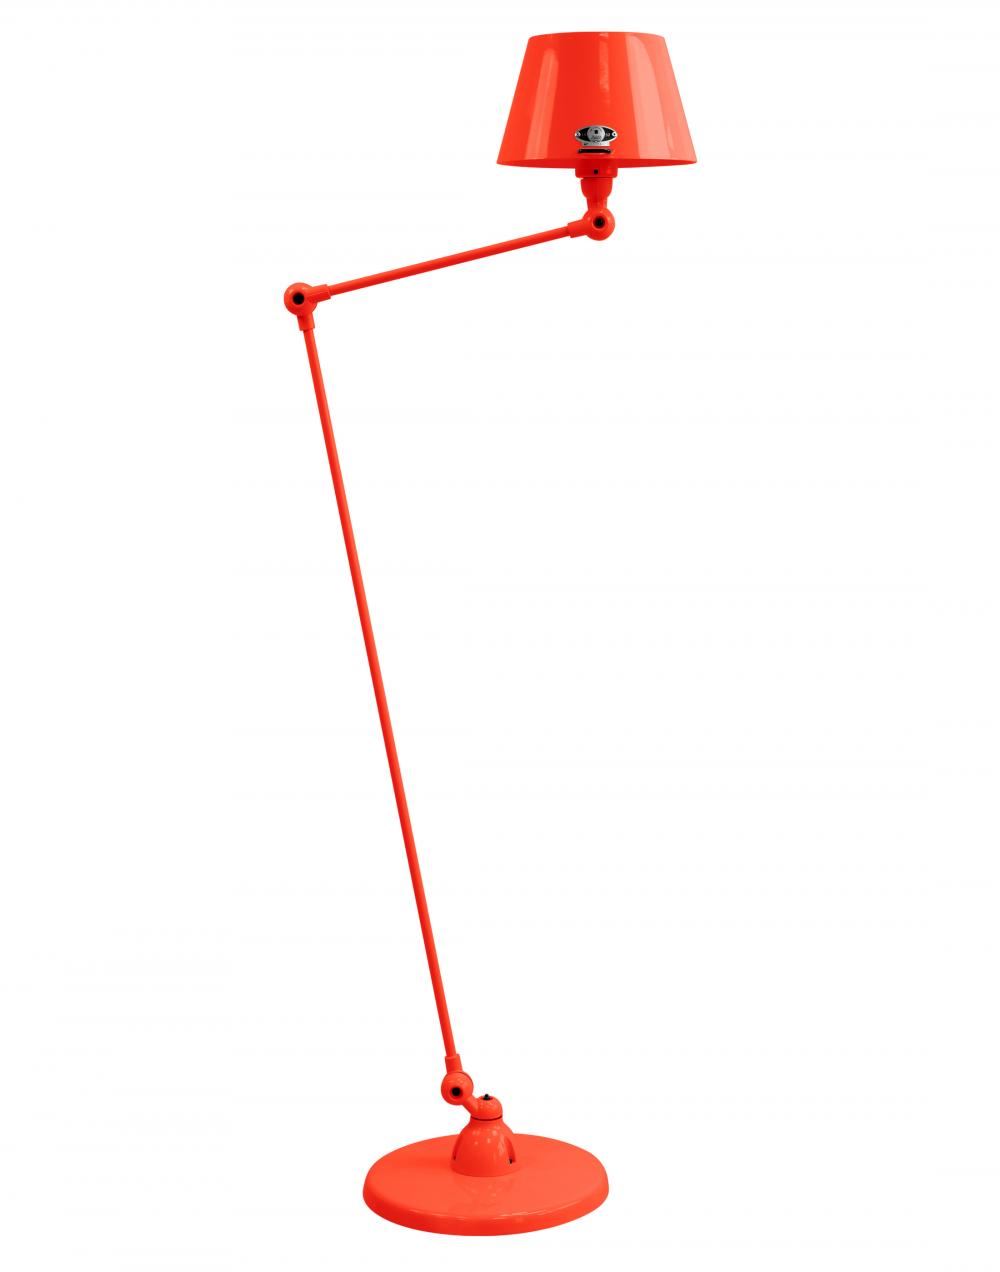 Jielde Aicler Two Arm Floor Light Straight Shade Red Gloss